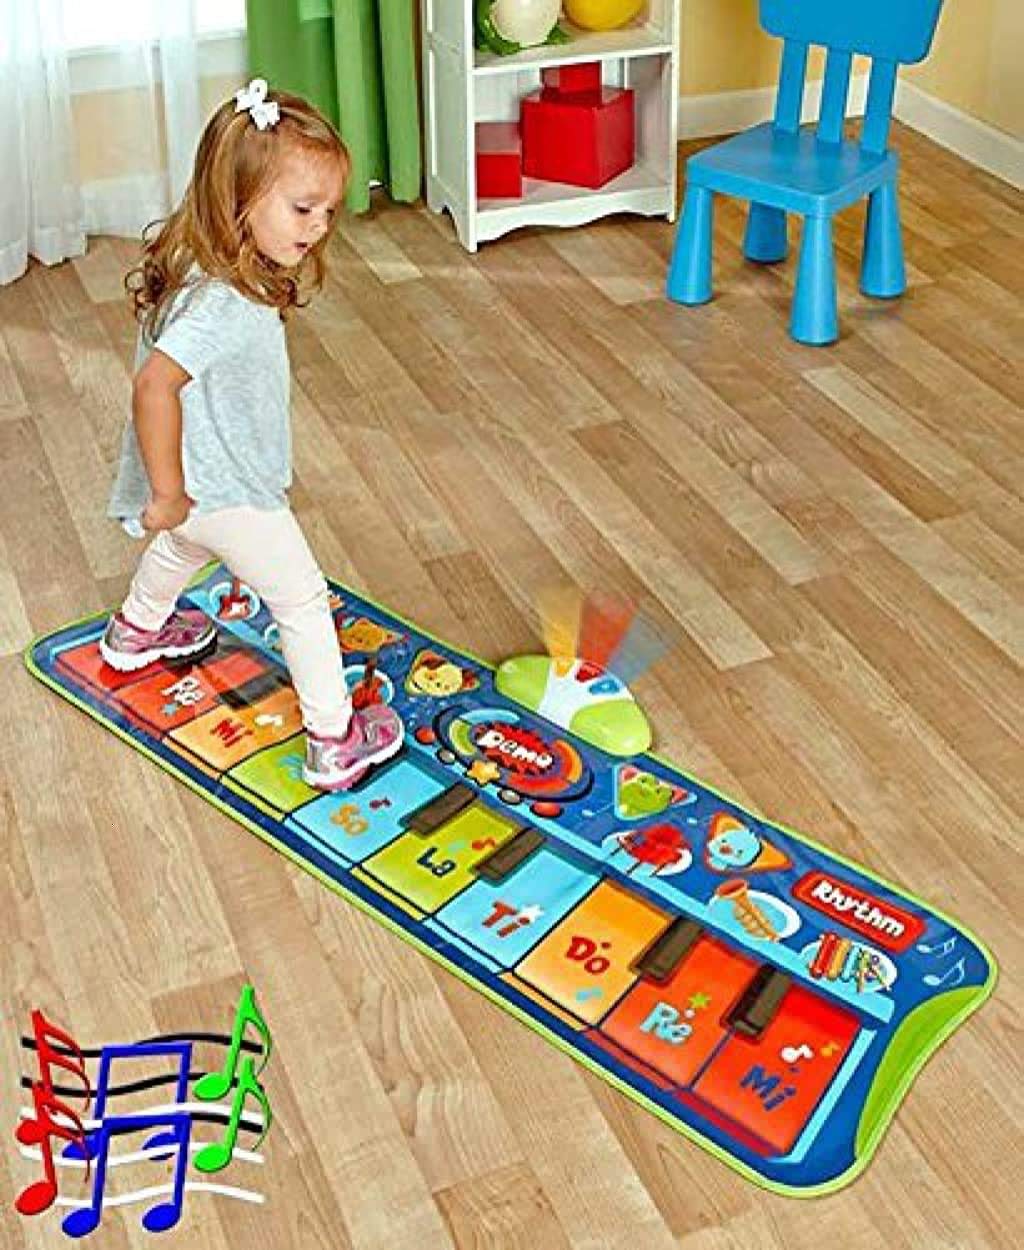 Fun Step-to-Play Junior Battery Operated Piano Mat with Flashing Lights and 20 Demo Songs for Kids Ages 2+